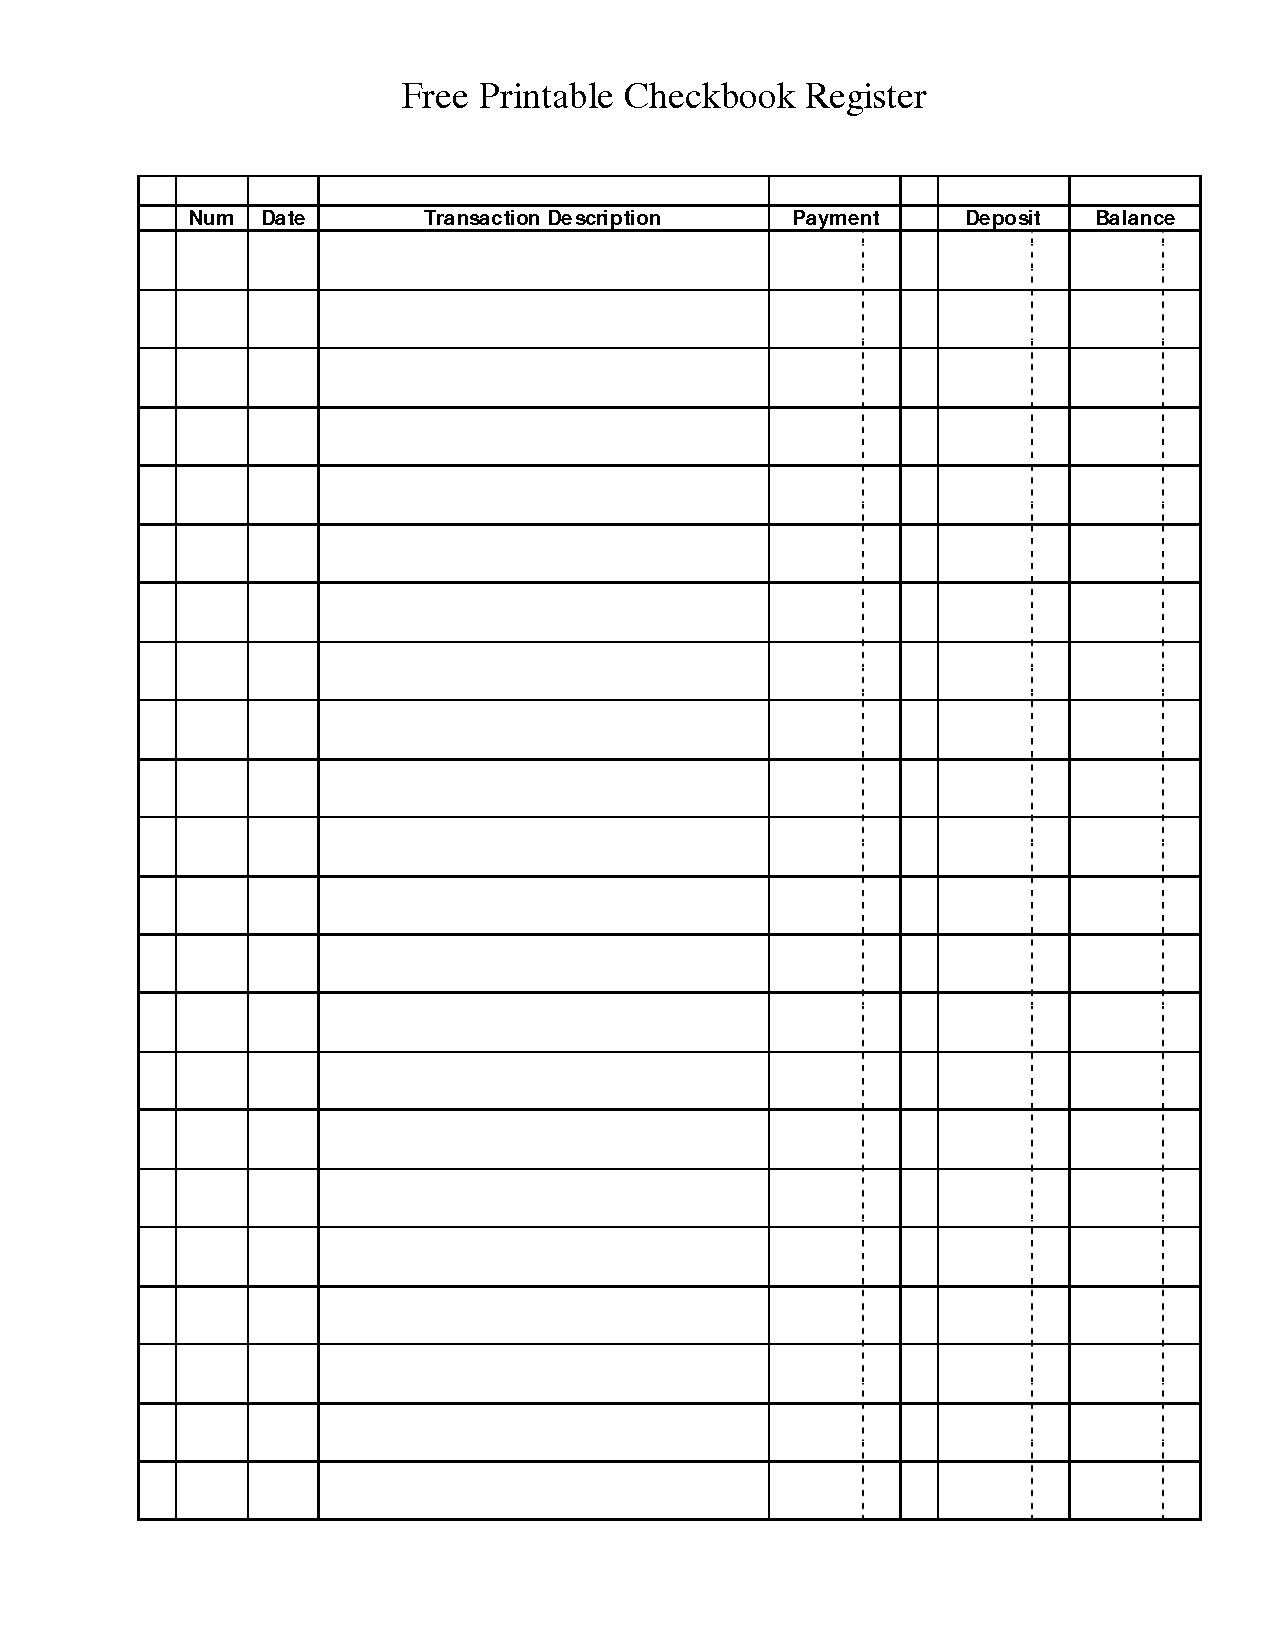 Free Printable Template Chores | Free Printable Check With Regard To Blank Cheque Template Download Free